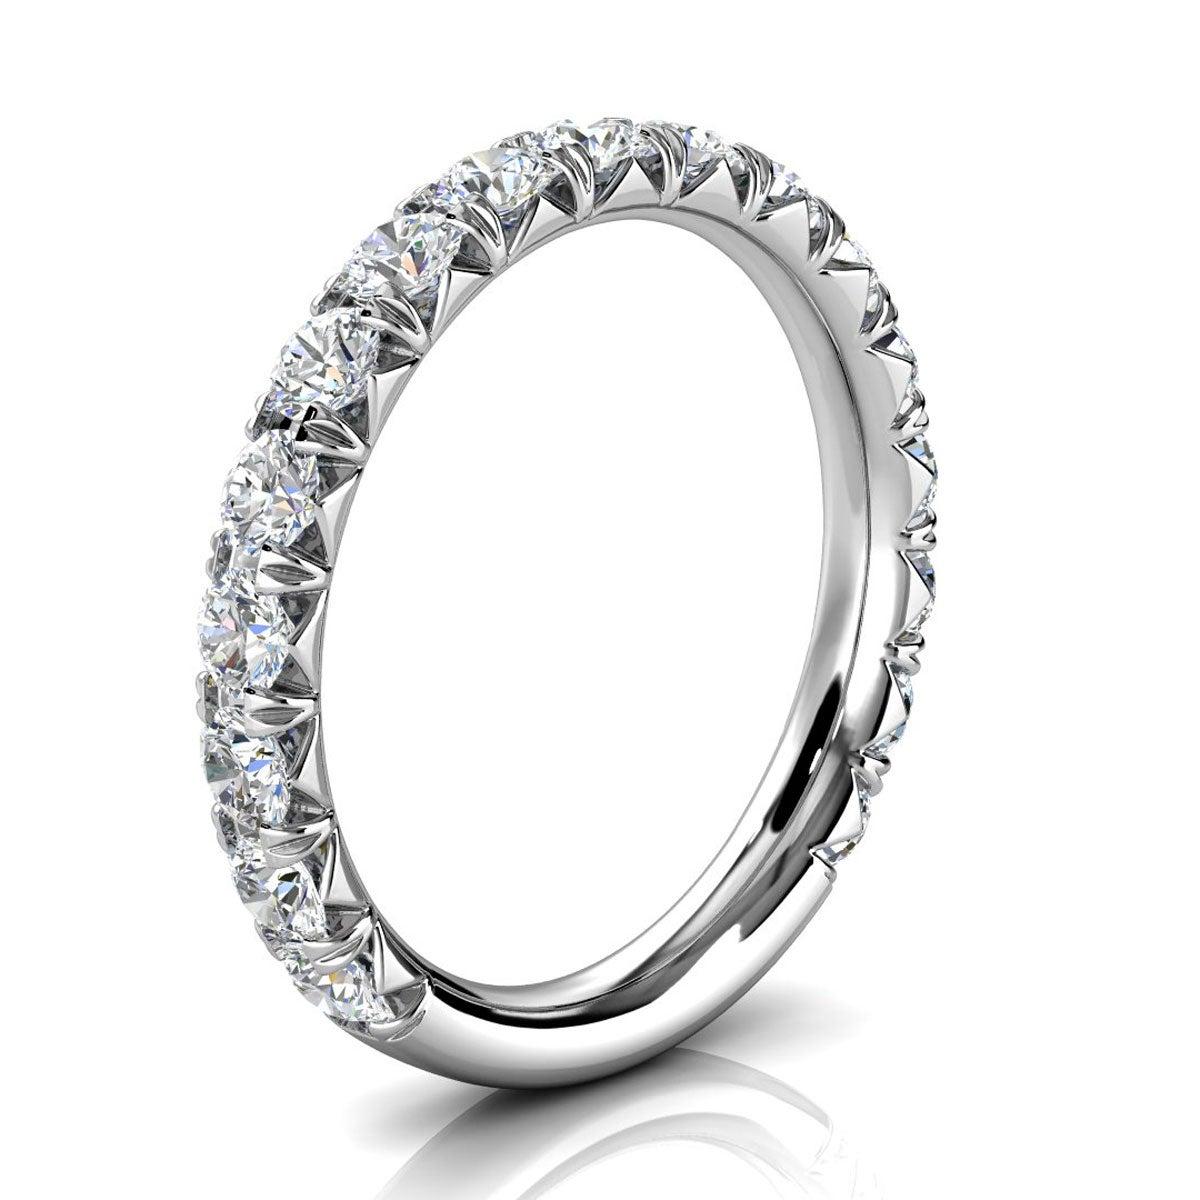 For Sale:  18k White Gold GIA French Pave Diamond Ring '1 Ct. Tw' 2